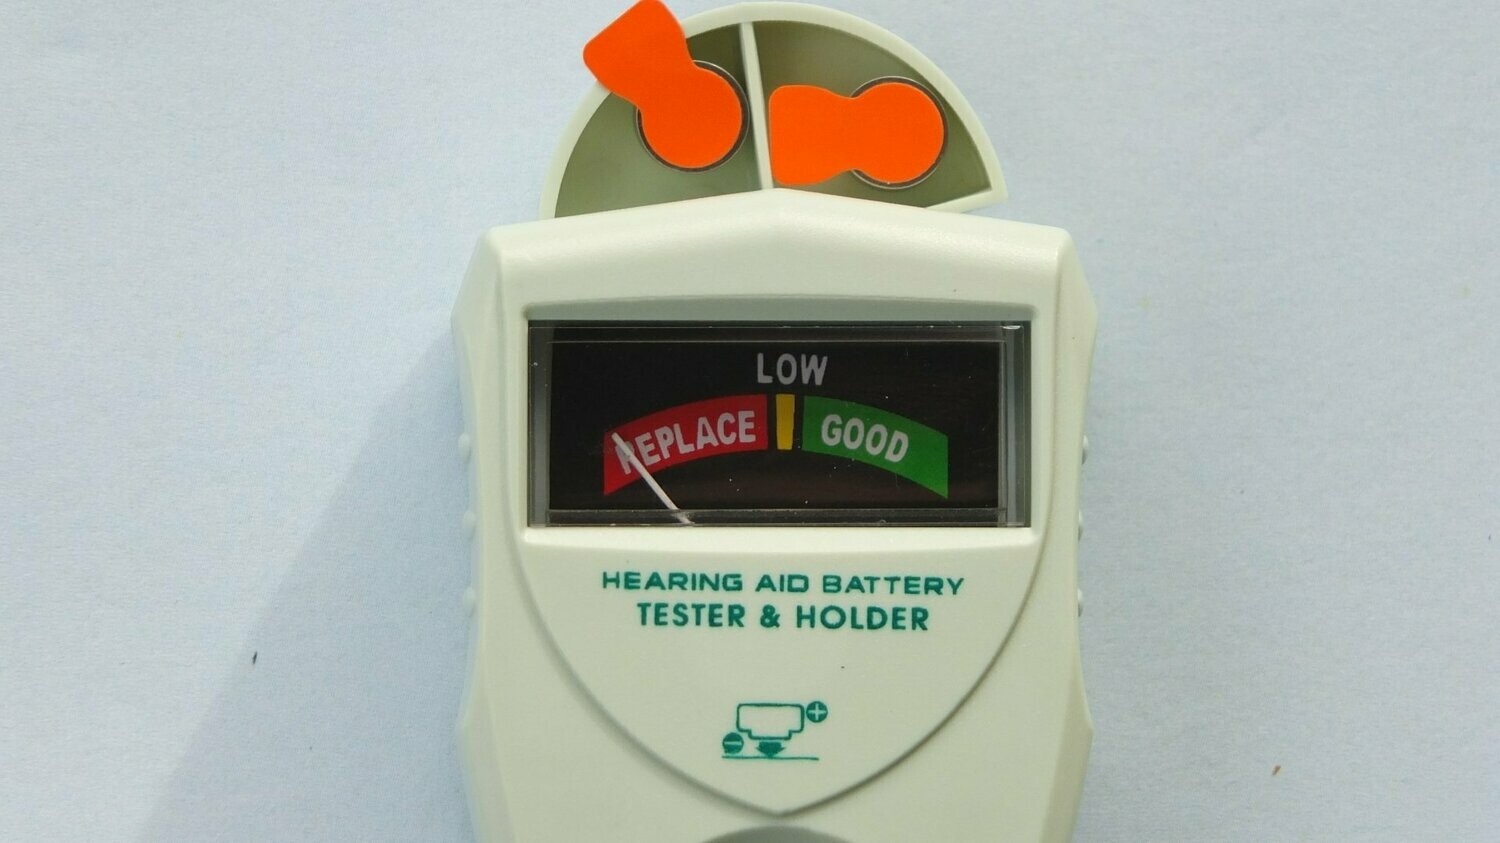 Hearing Aid Battery Tester & Holder